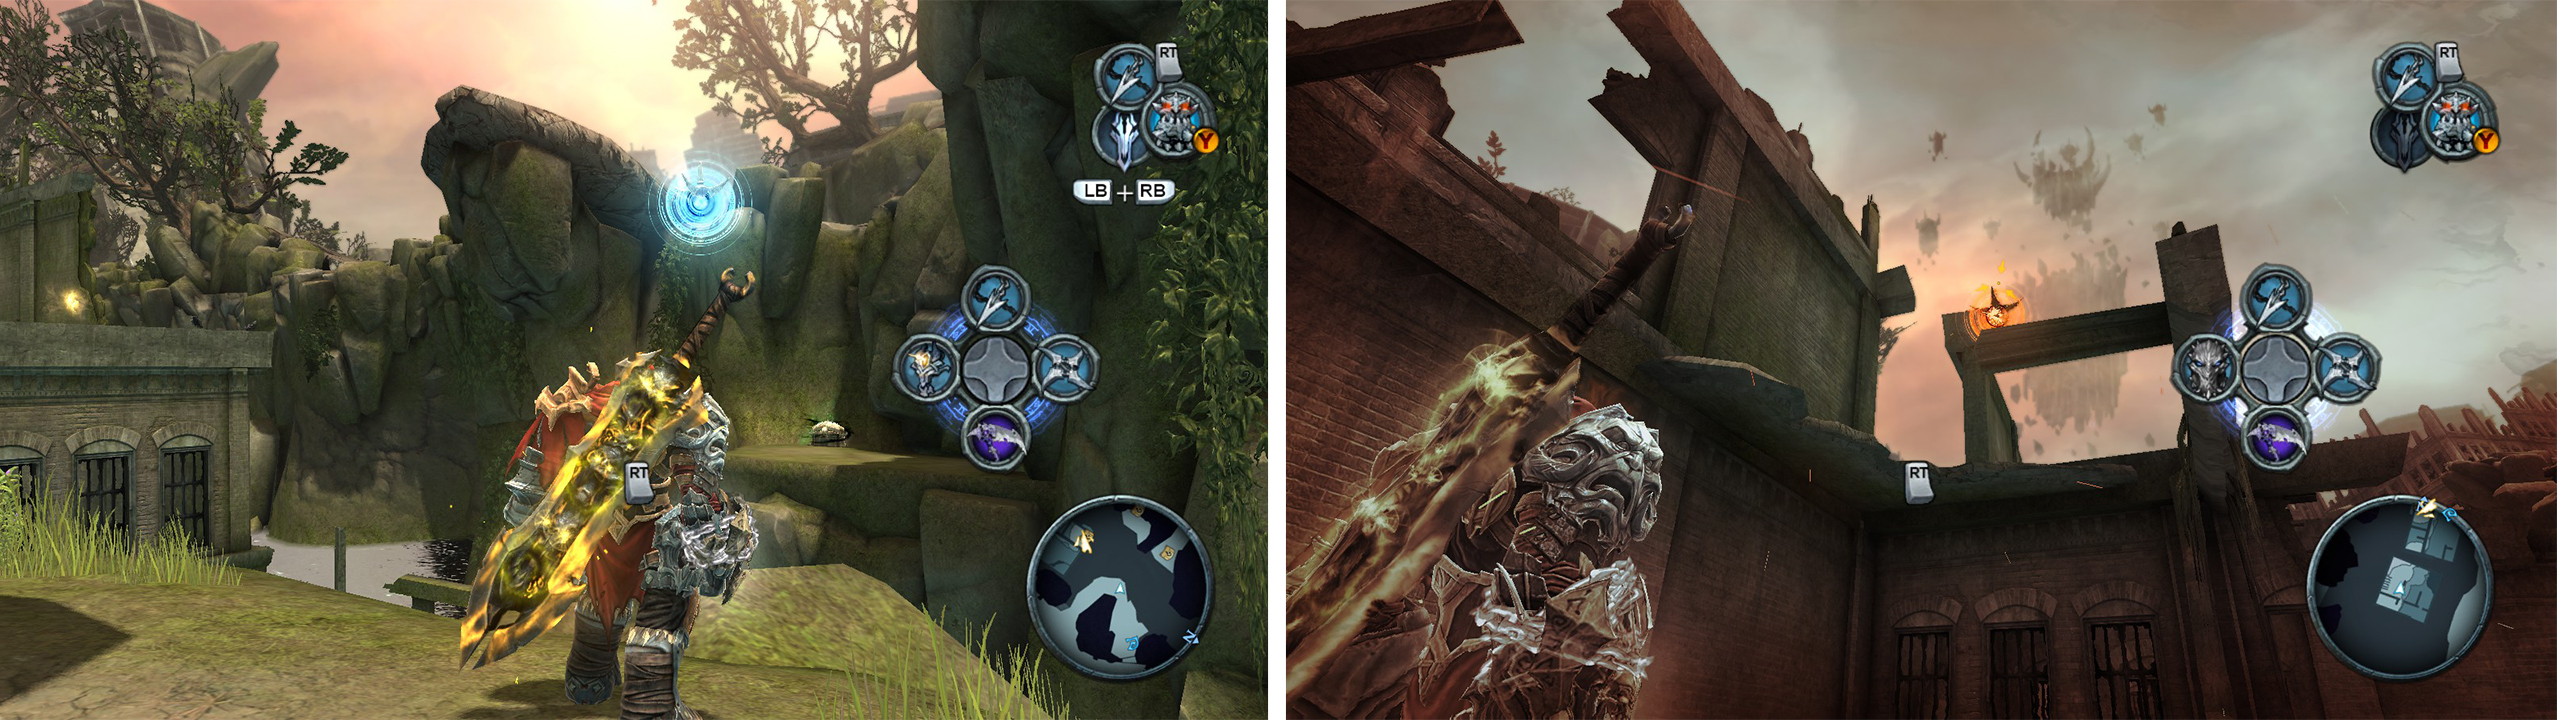 Use the grapple point (left) to reach a Life Stone Shard. With the Mask of Shadows look for the grapple point leading to the next Armageddon Blade Shard (right).